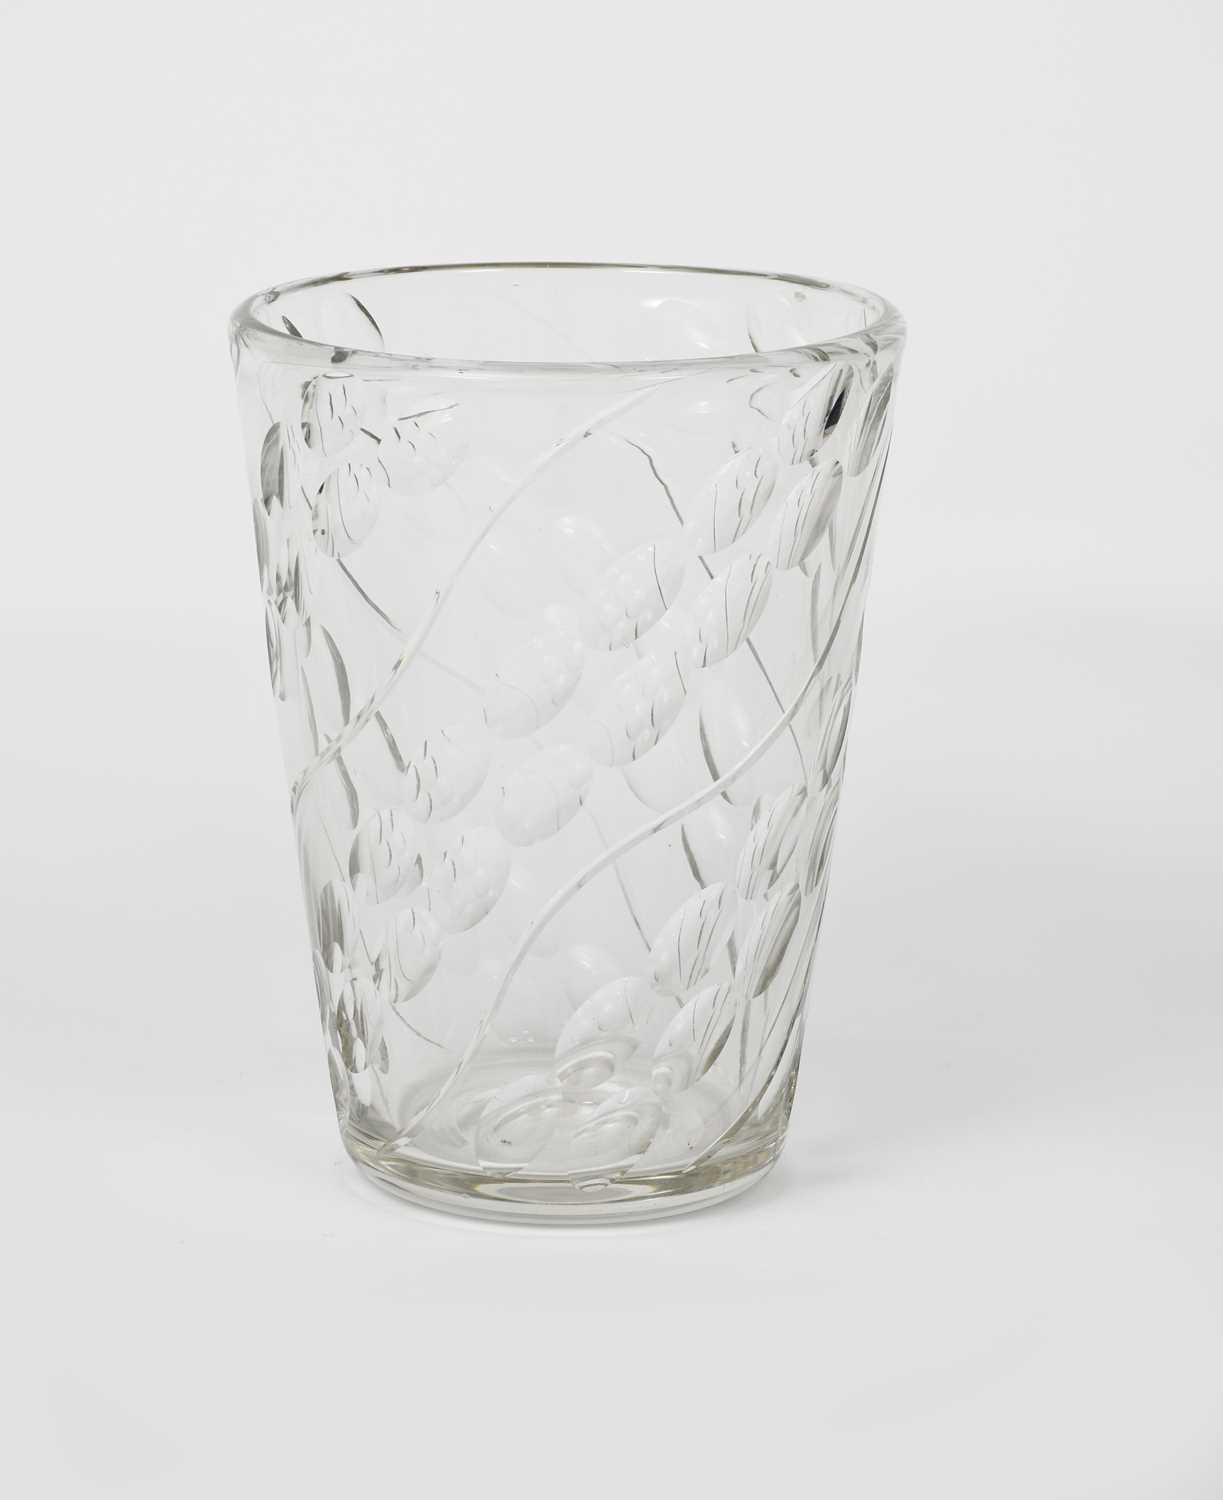 A tall Powell Whitefriars glass vase by James Powell, flaring cylindrical form, cut with wavy